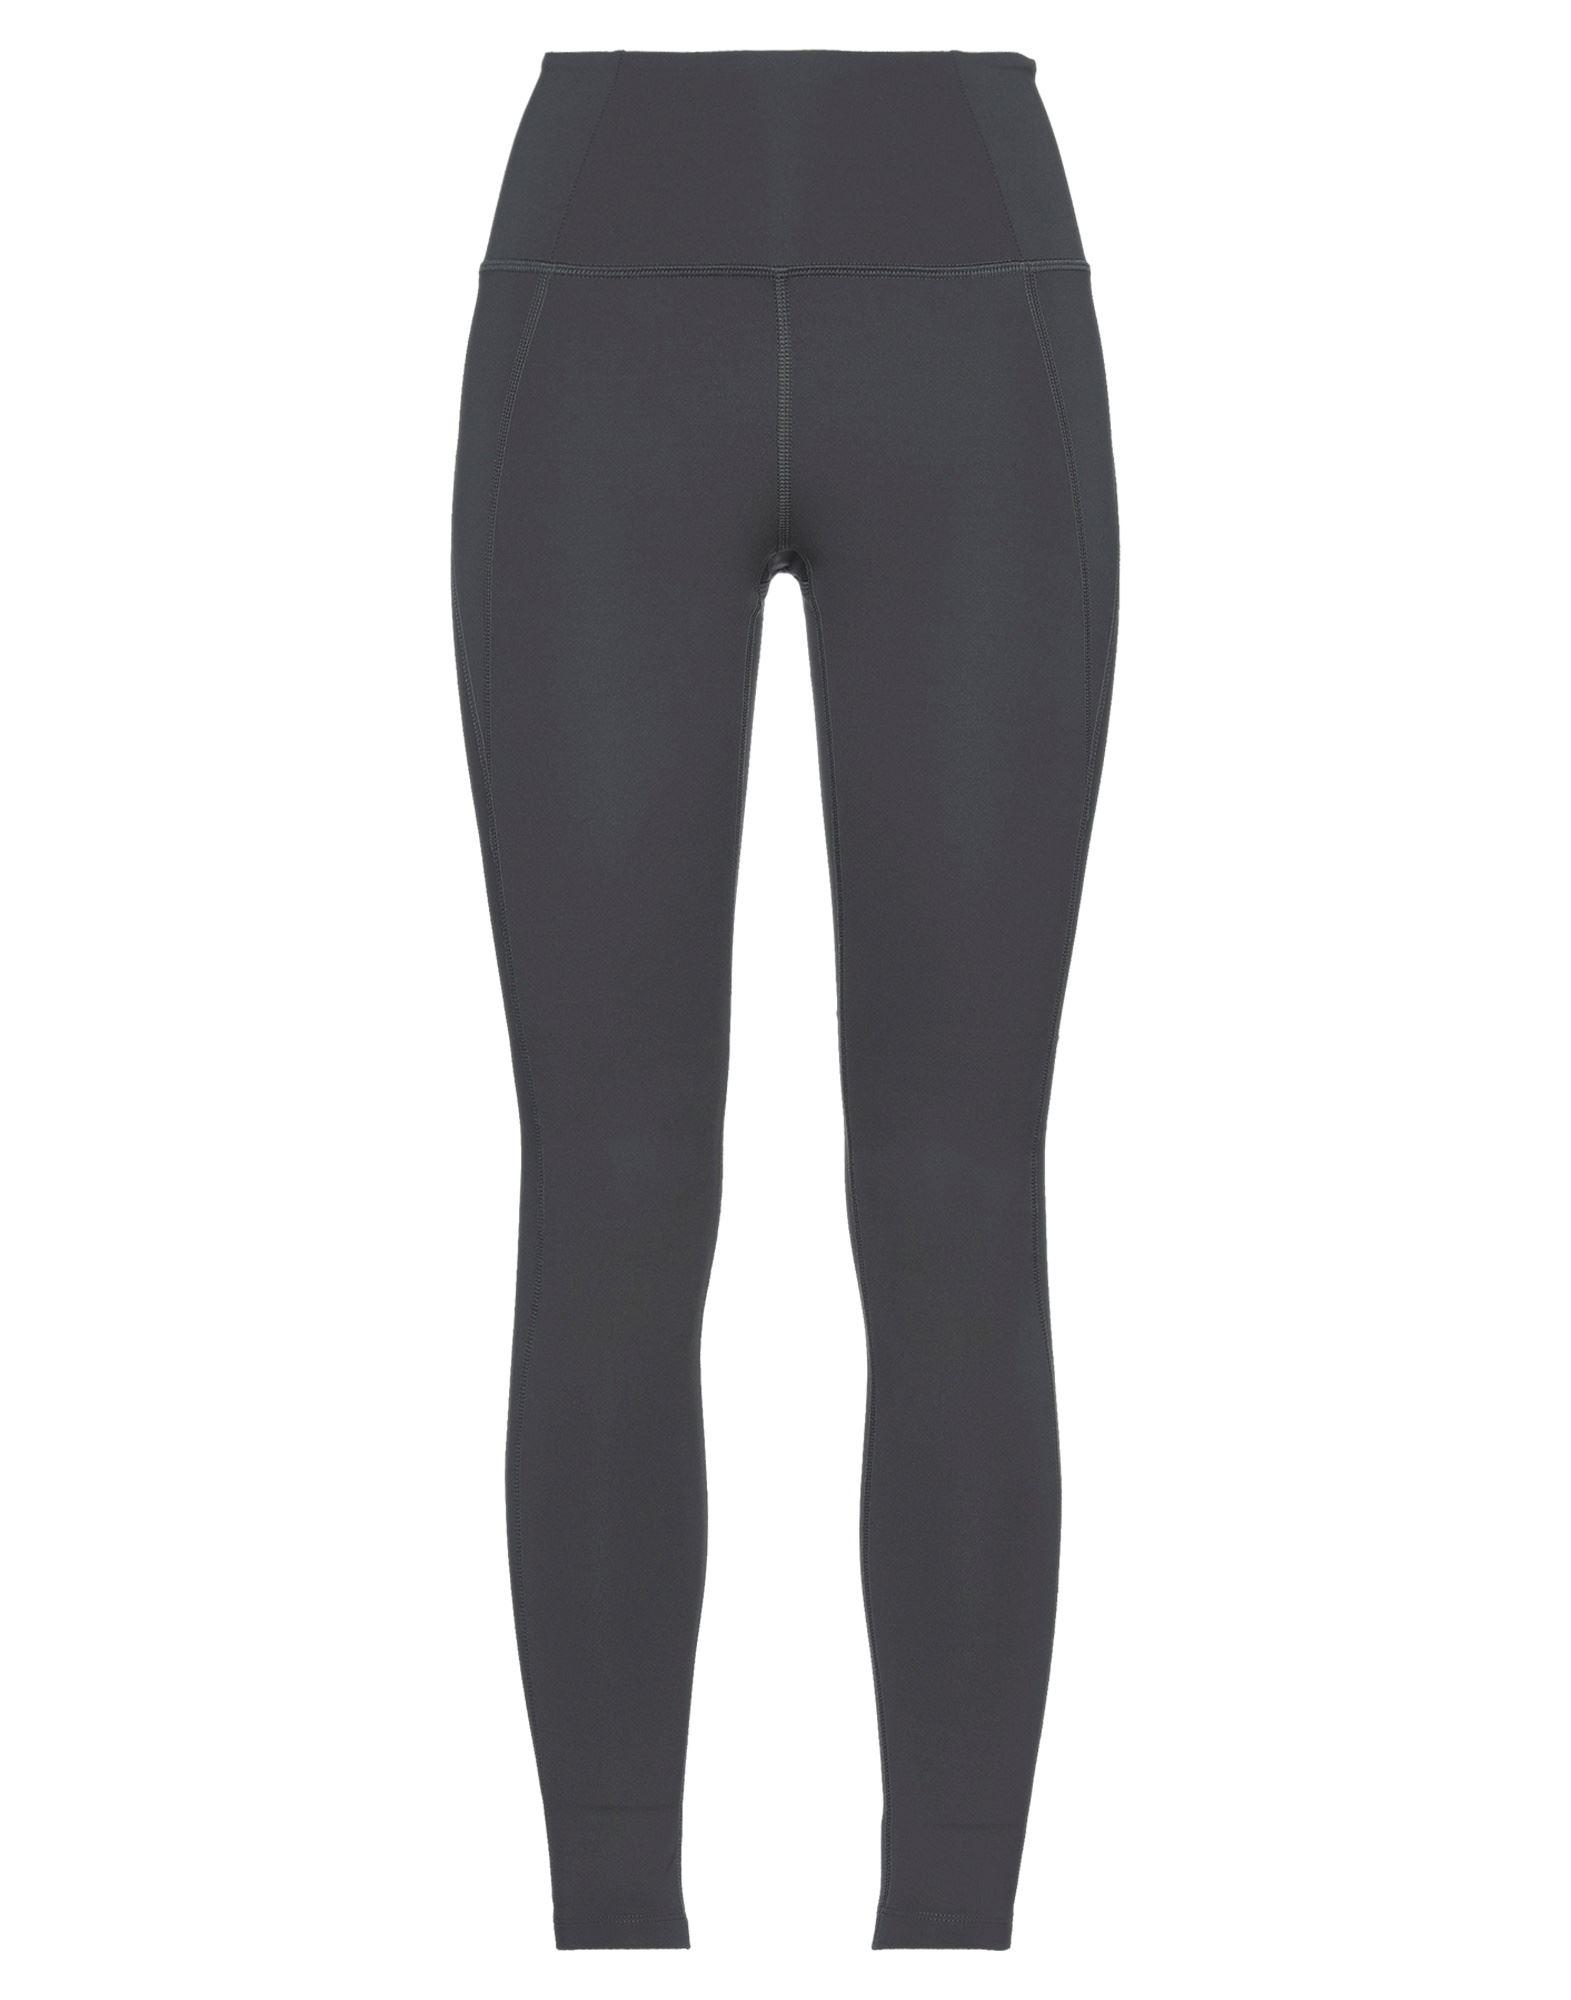 GIRLFRIEND COLLECTIVE Synthetic Leggings in Lead (Gray) | Lyst